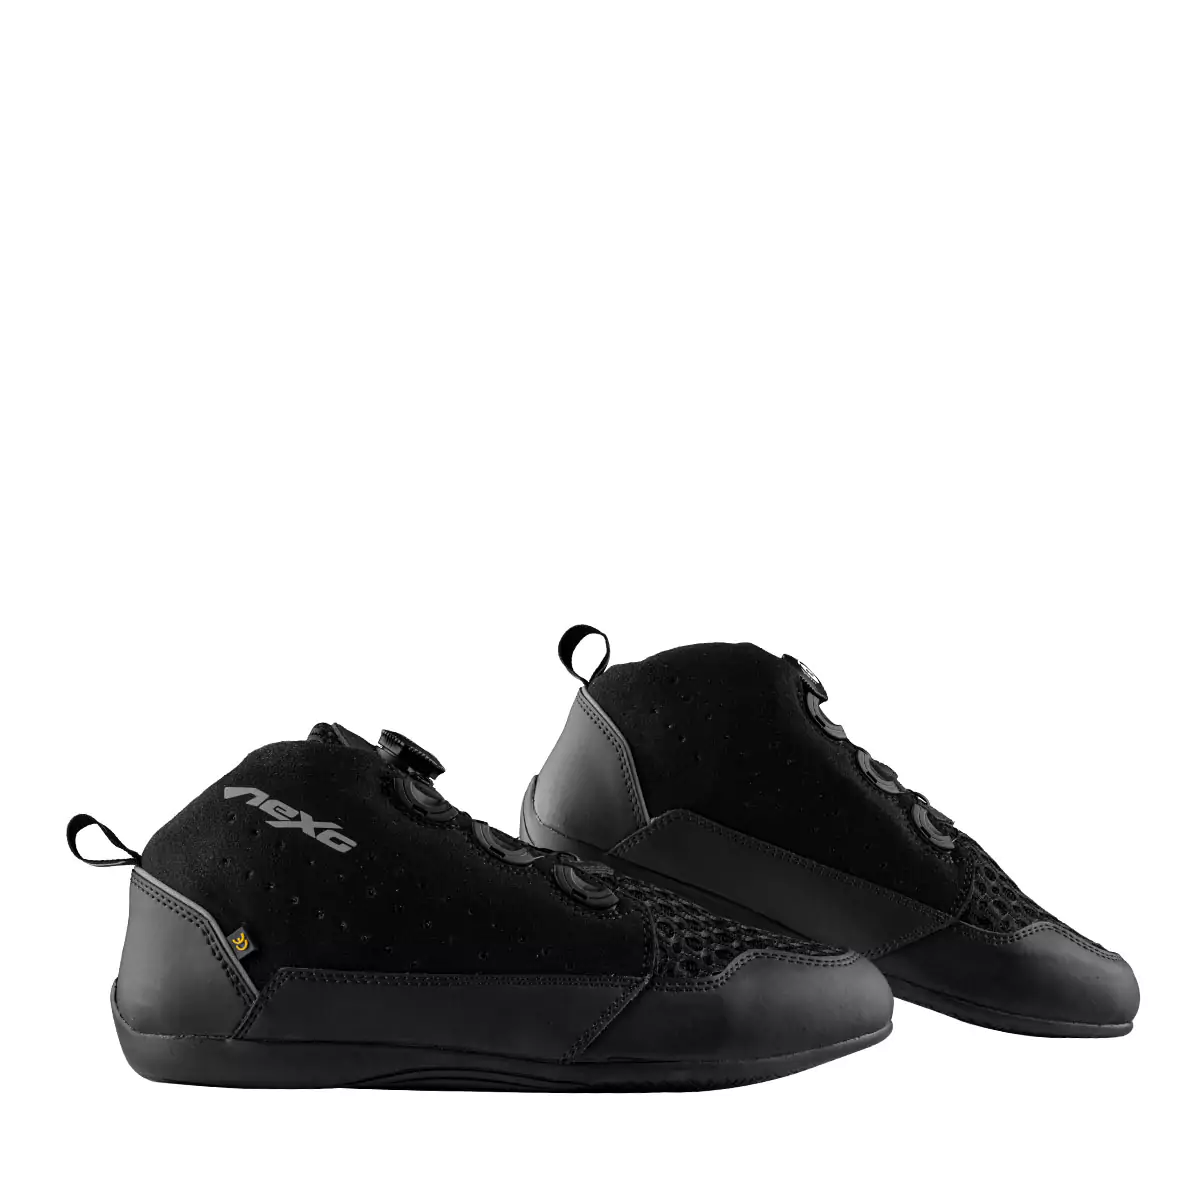 black colored motorcycle sneaker shoes pair giving velevety texture